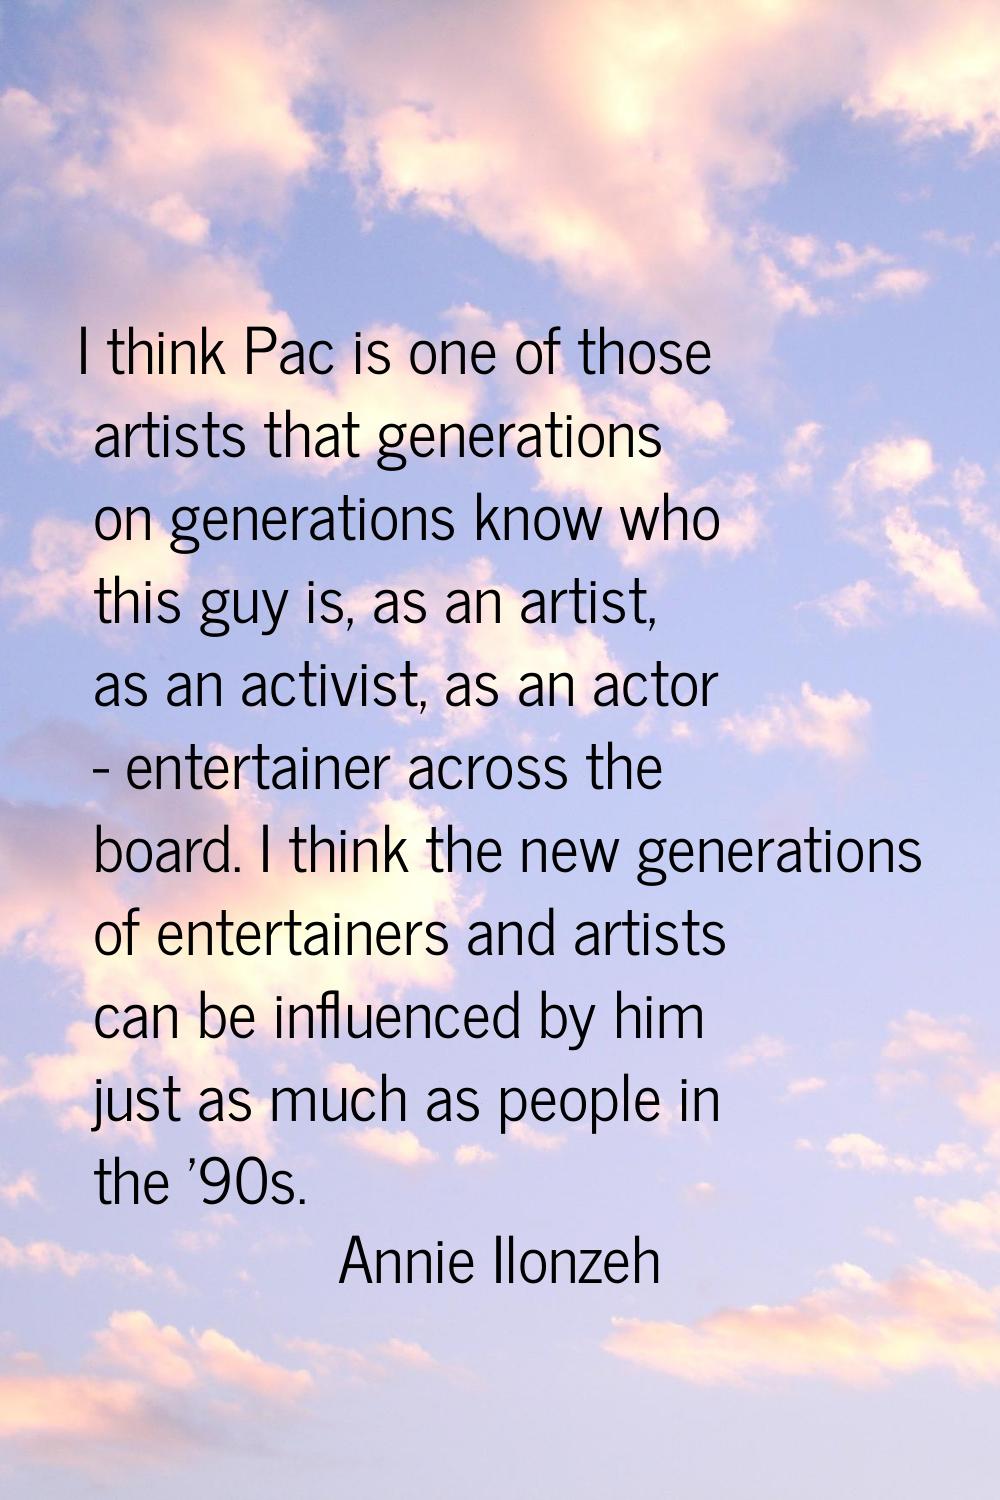 I think Pac is one of those artists that generations on generations know who this guy is, as an art